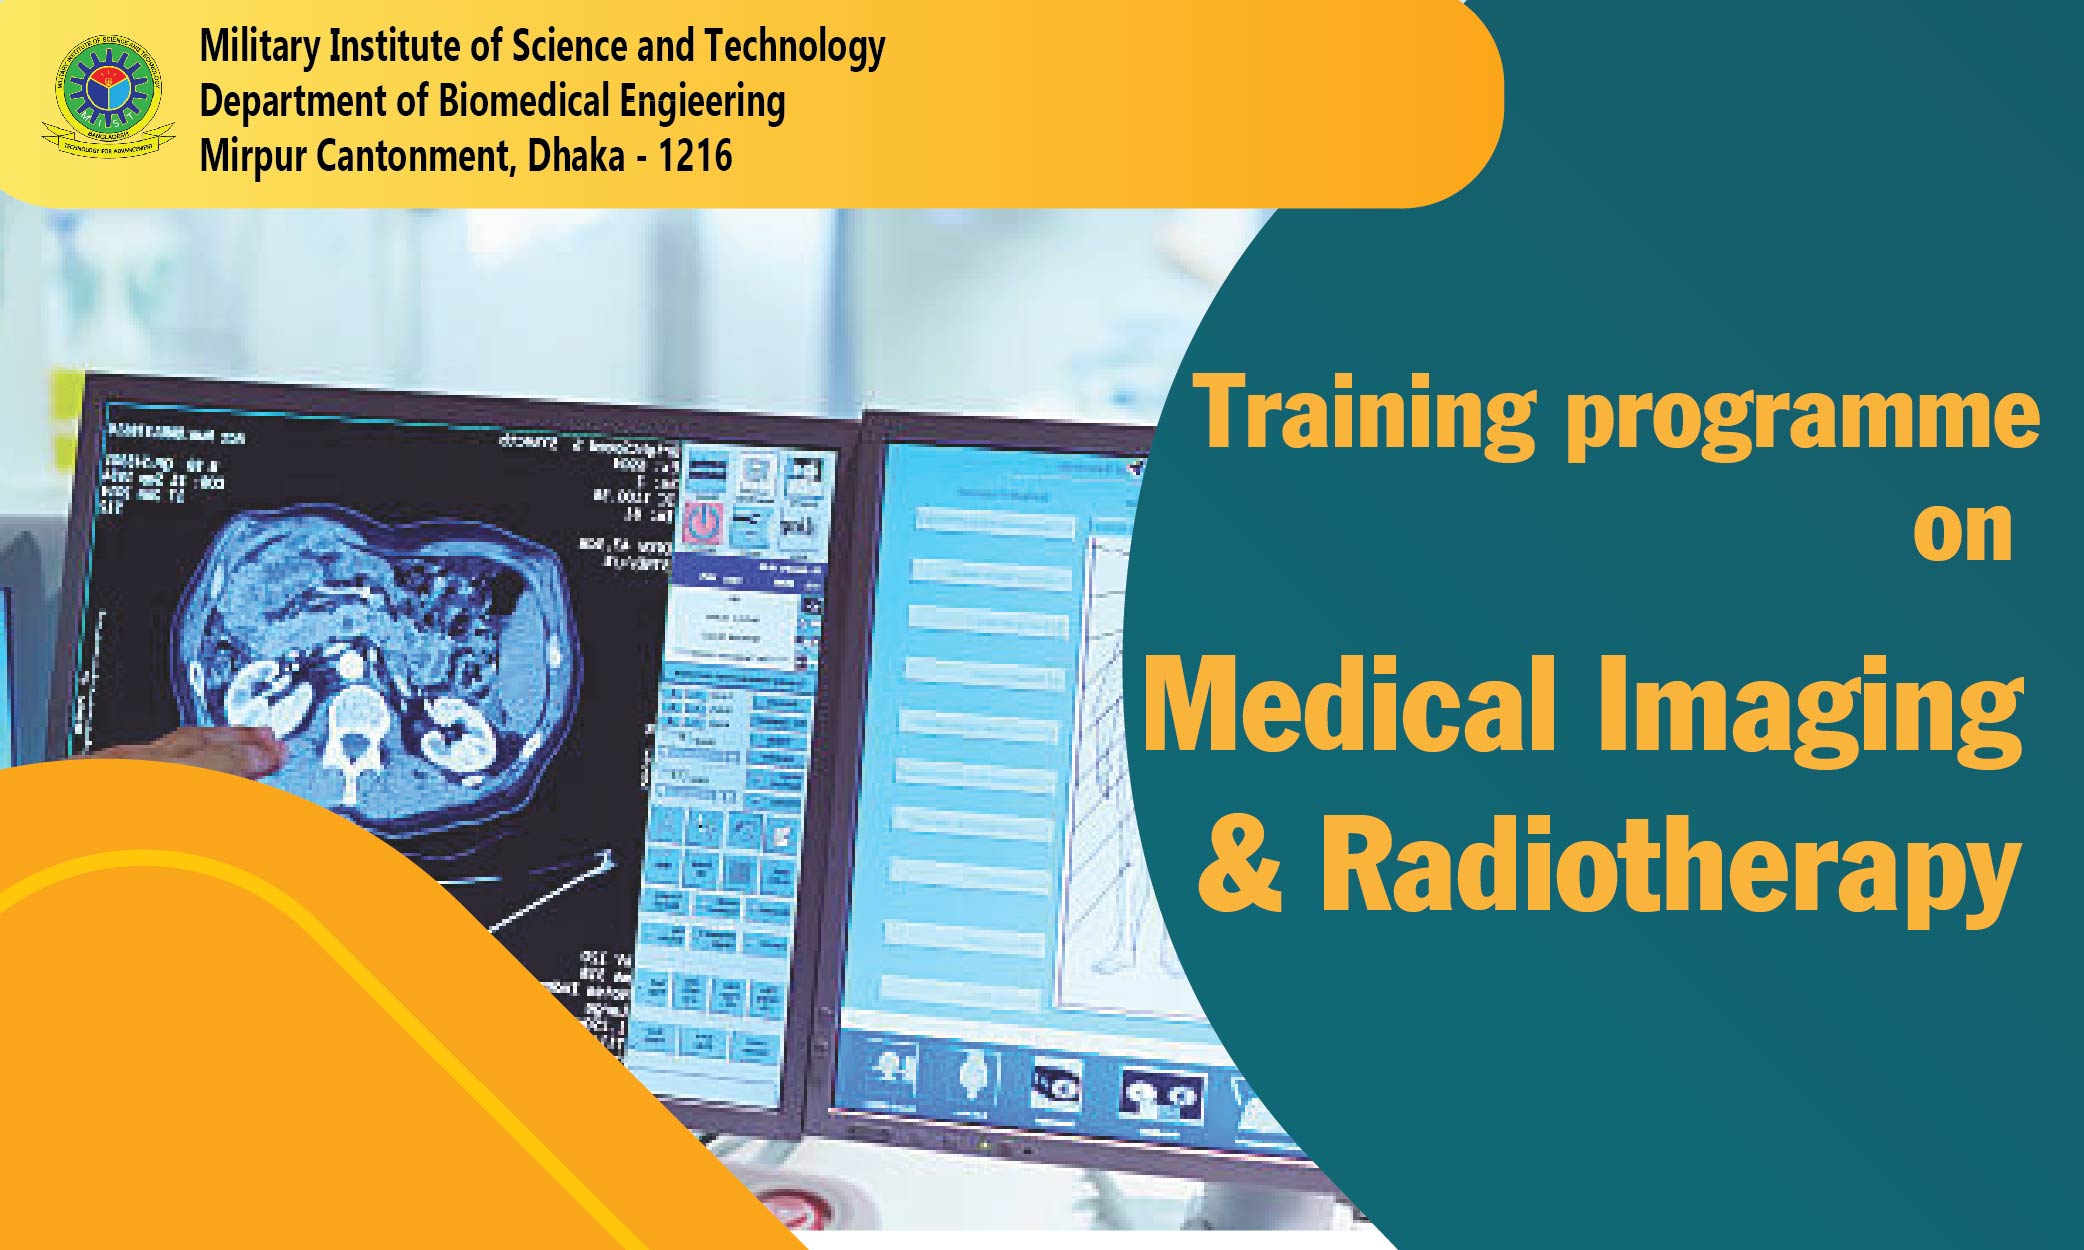 TRAINING PROGRAMME ON MEDICAL IMAGING AND RADIOTHERAPY